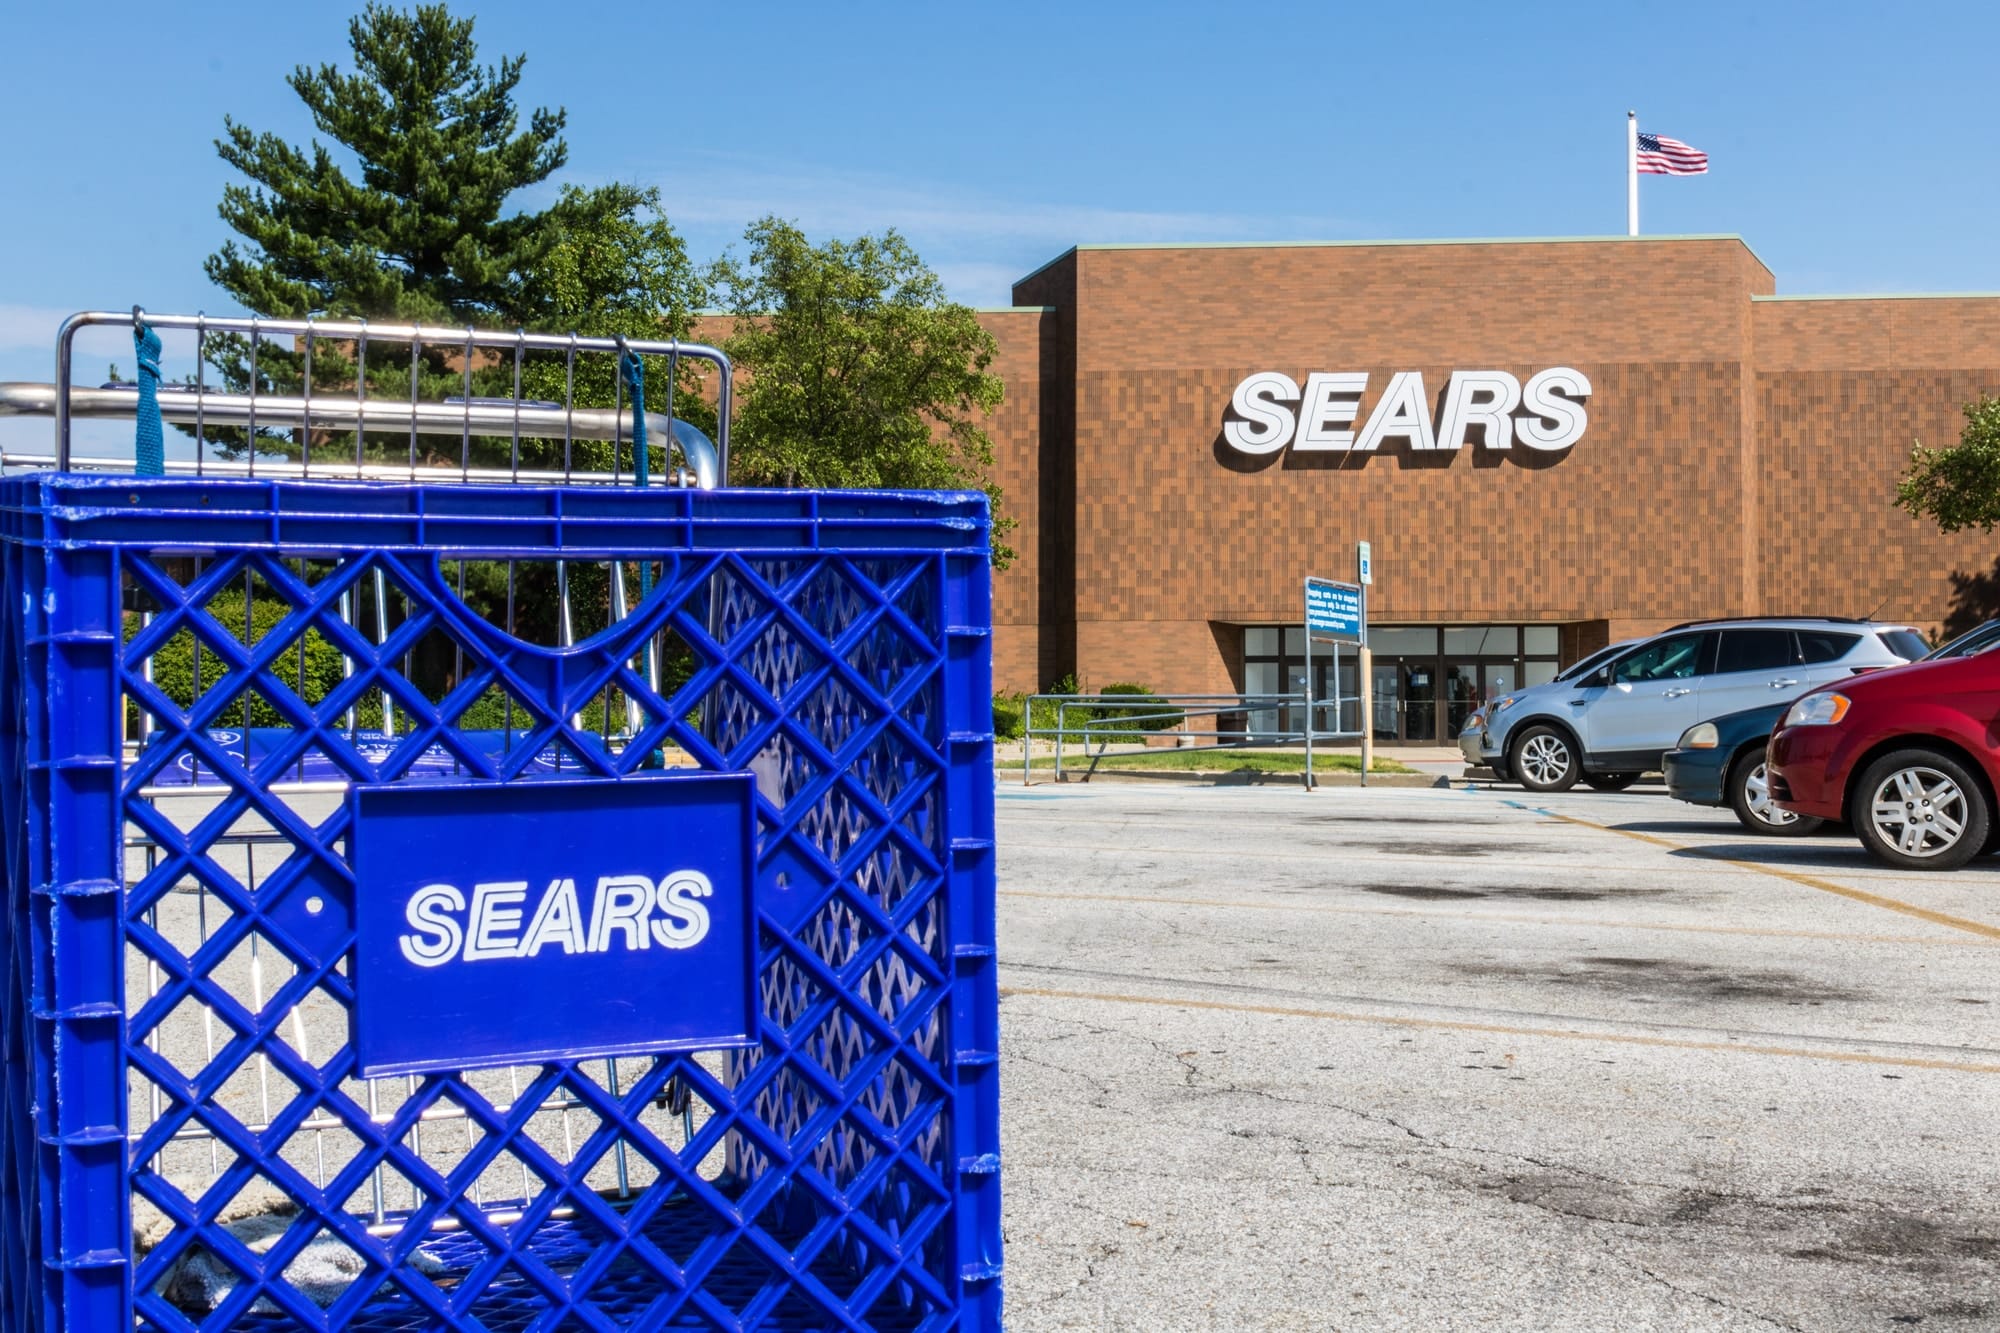 sears-swot-analysis-opportunities